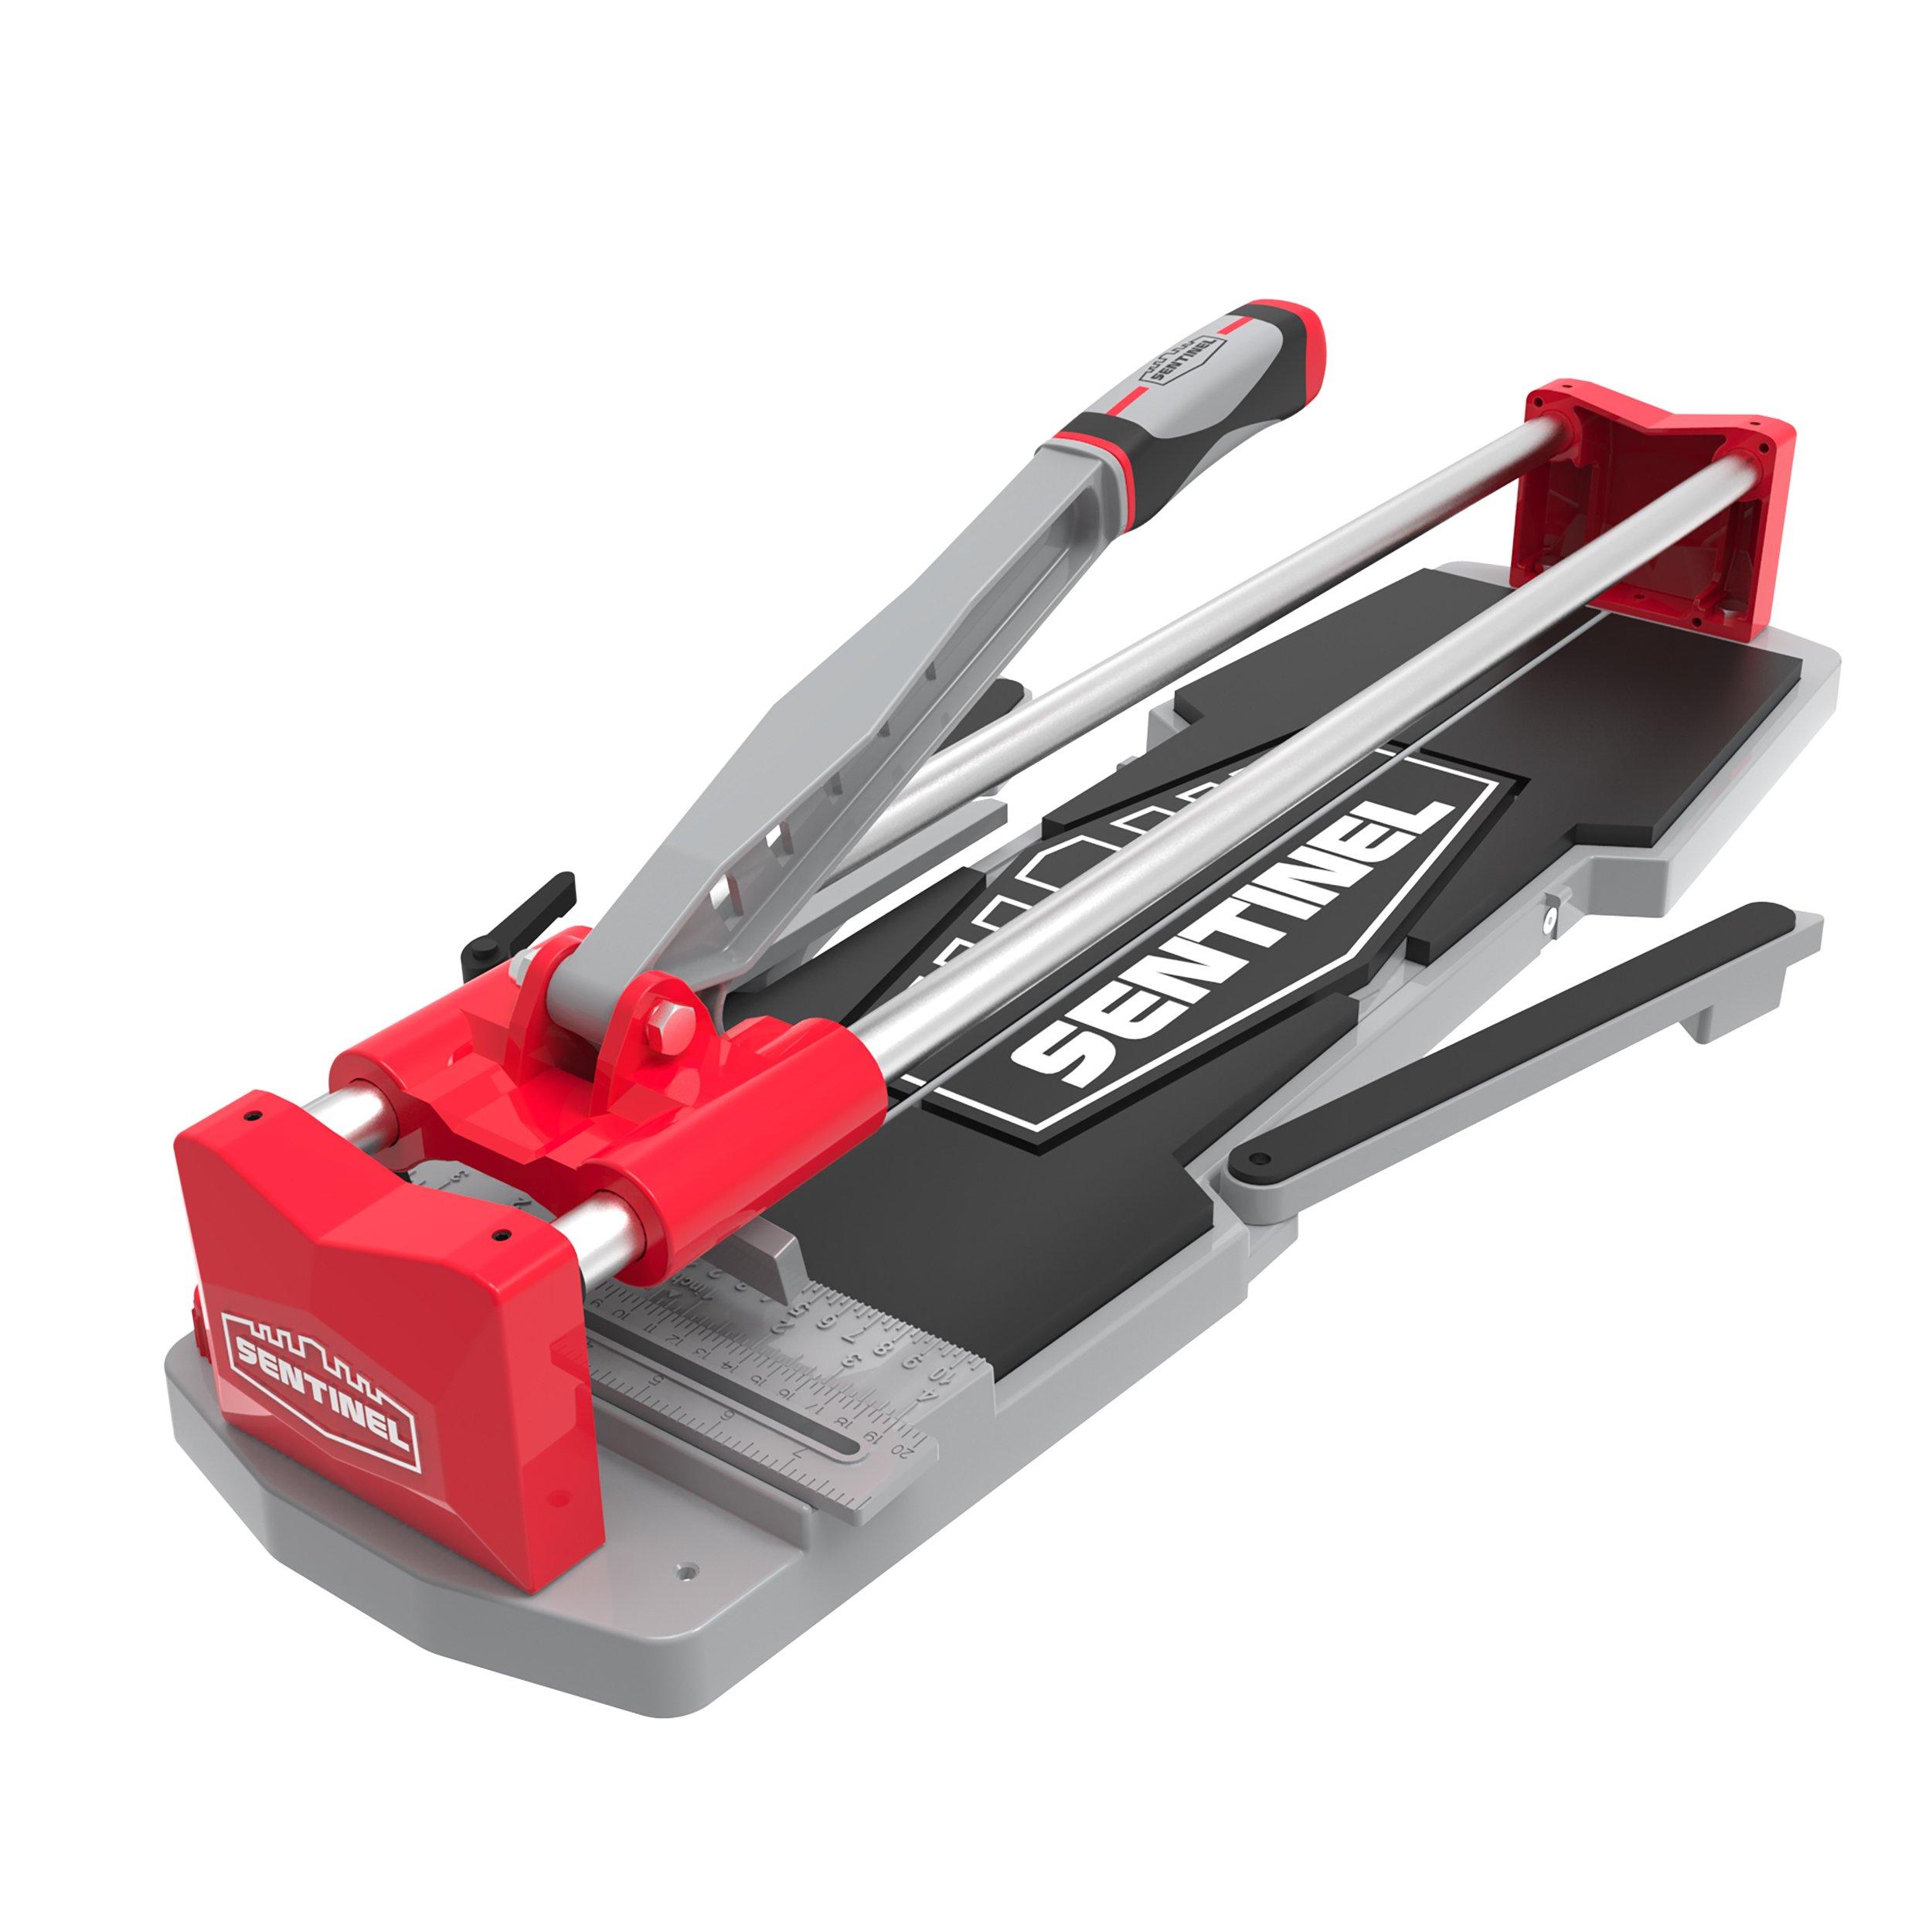 Sentinel 24in. Tile Cutter with Bag